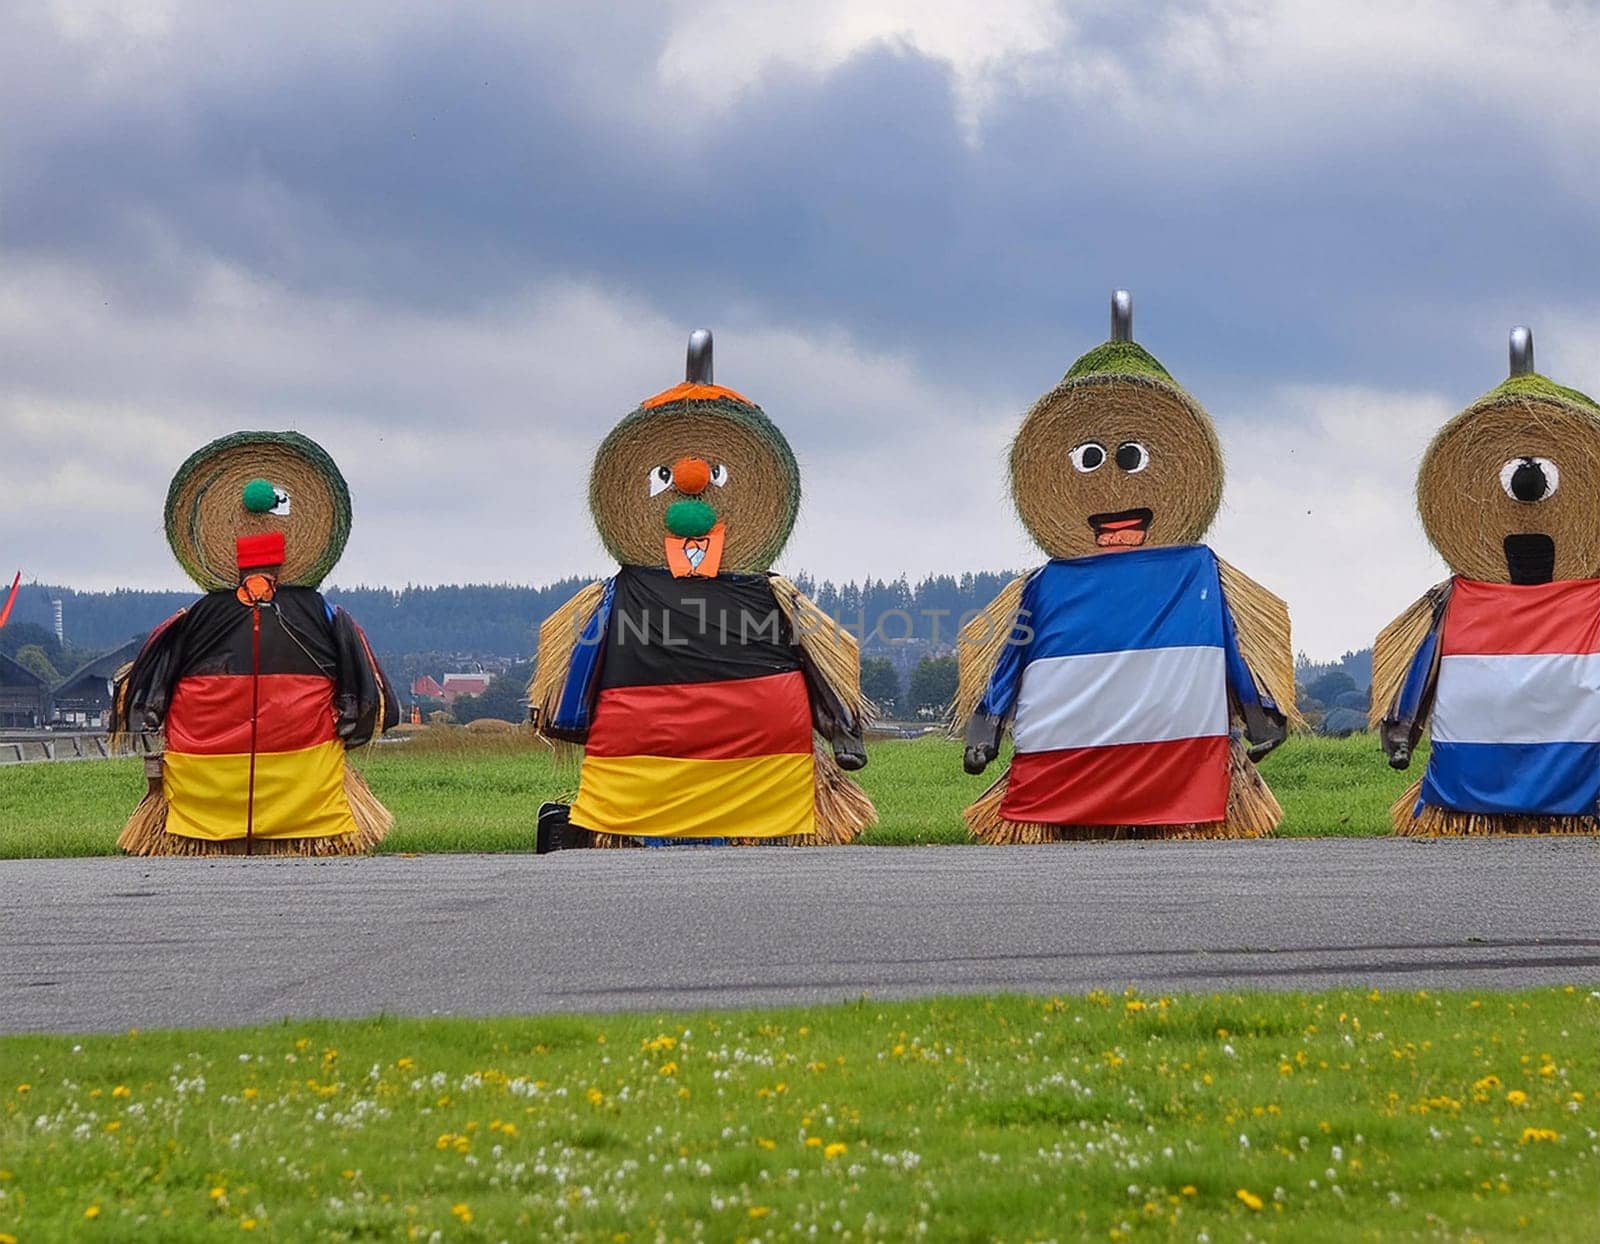 Funny figures made of straw bales with flags of different countries by JFsPic